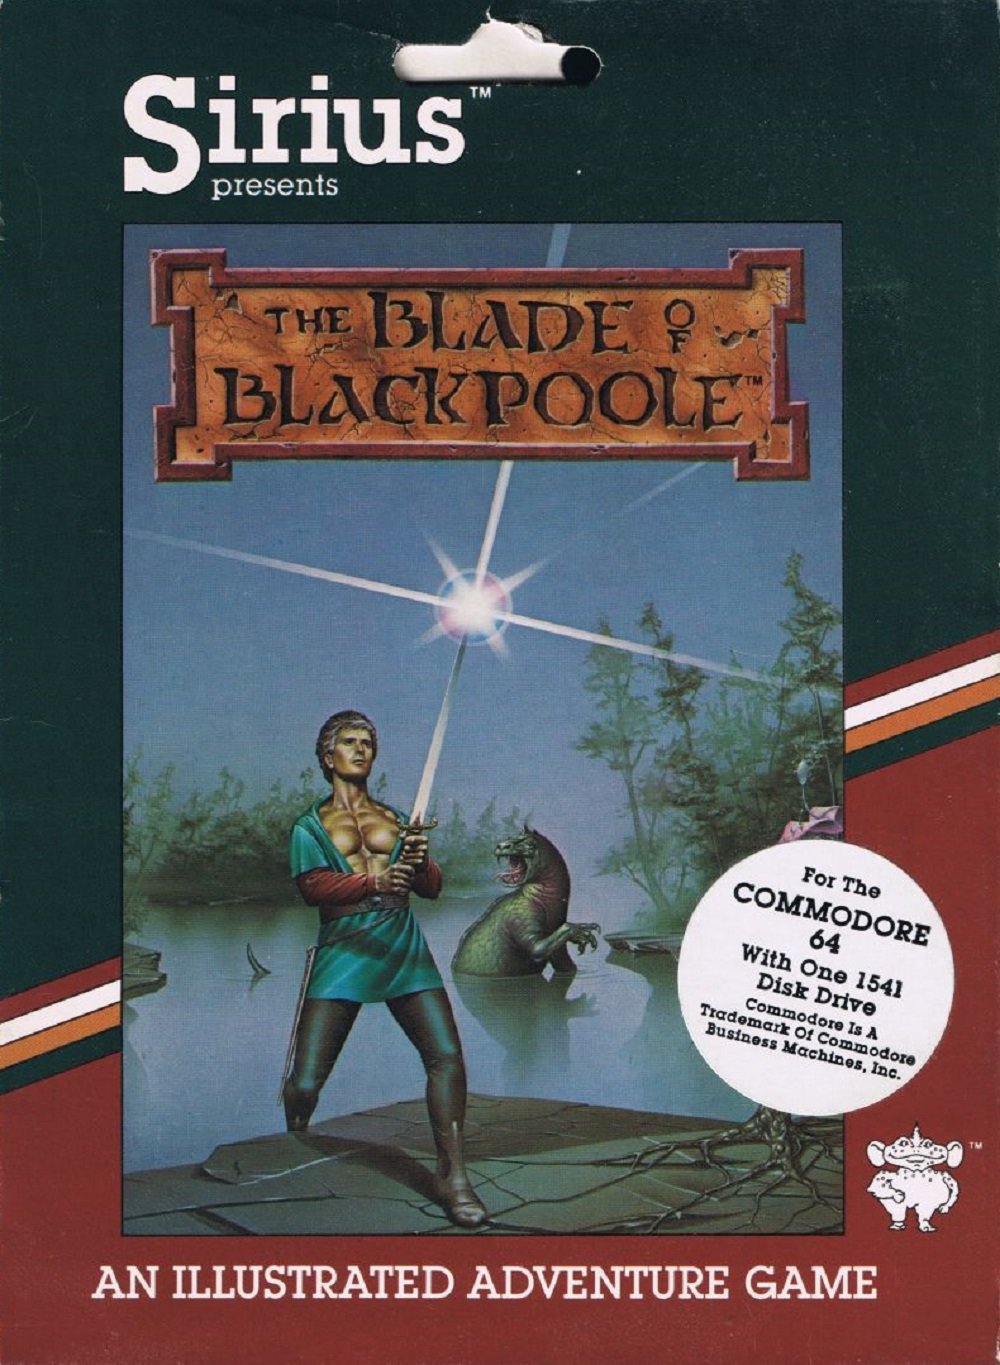 Image of The Blade of Blackpoole